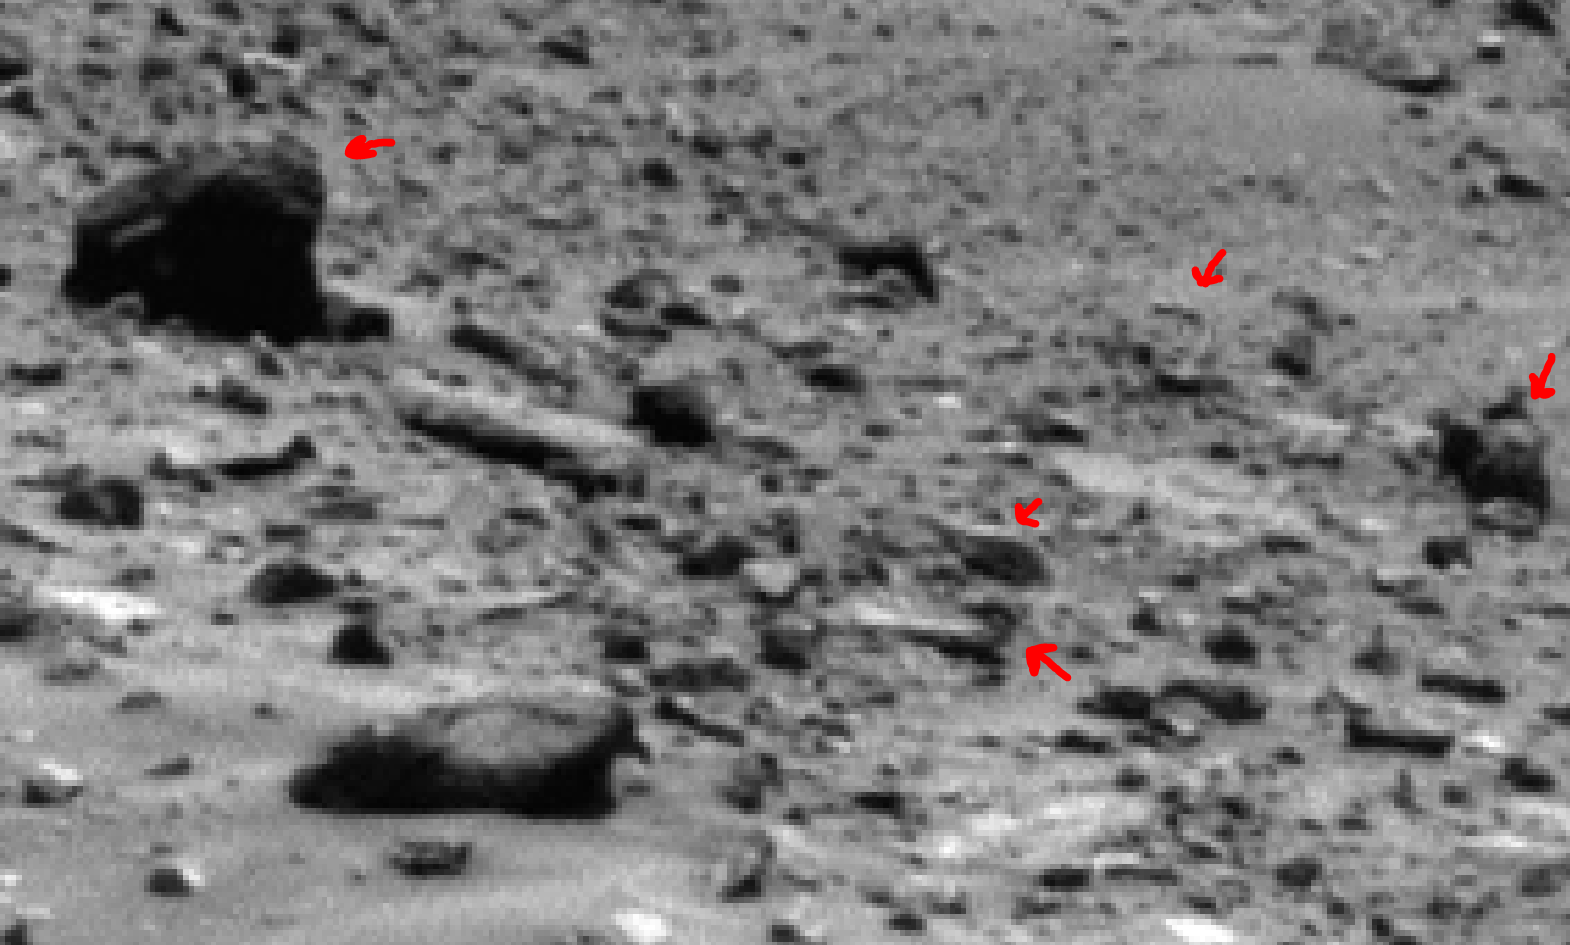 mars sol 1400 anomaly artifacts 5 was life on mars